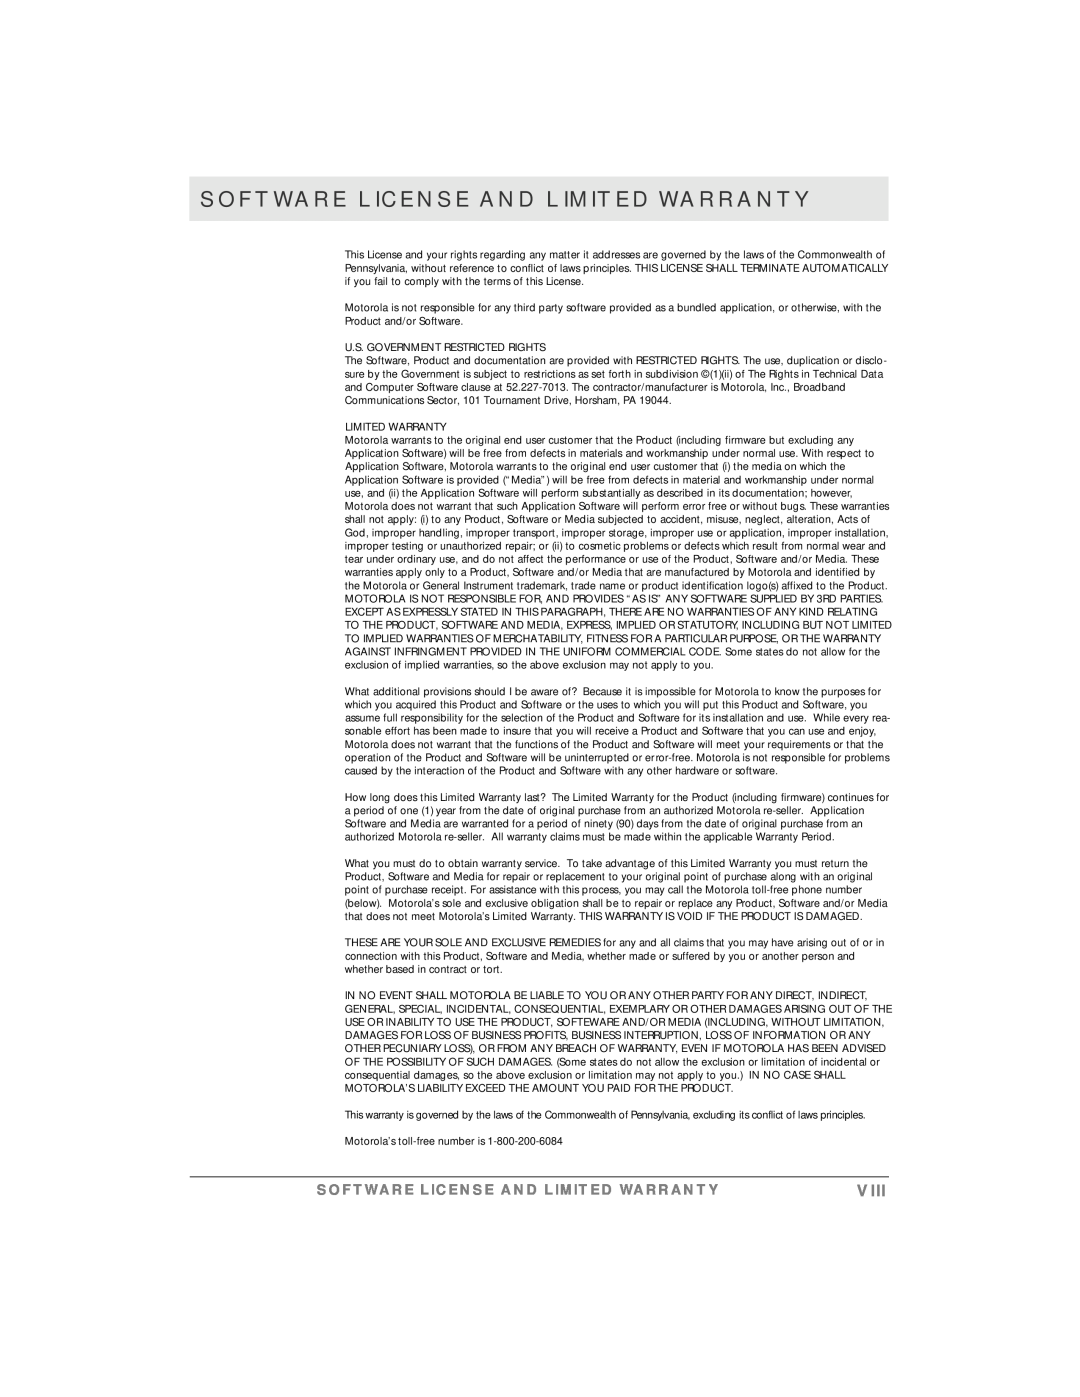 Motorola simplefi manual Software License And Limited Warranty, Viii, U.S. Government Restricted Rights 